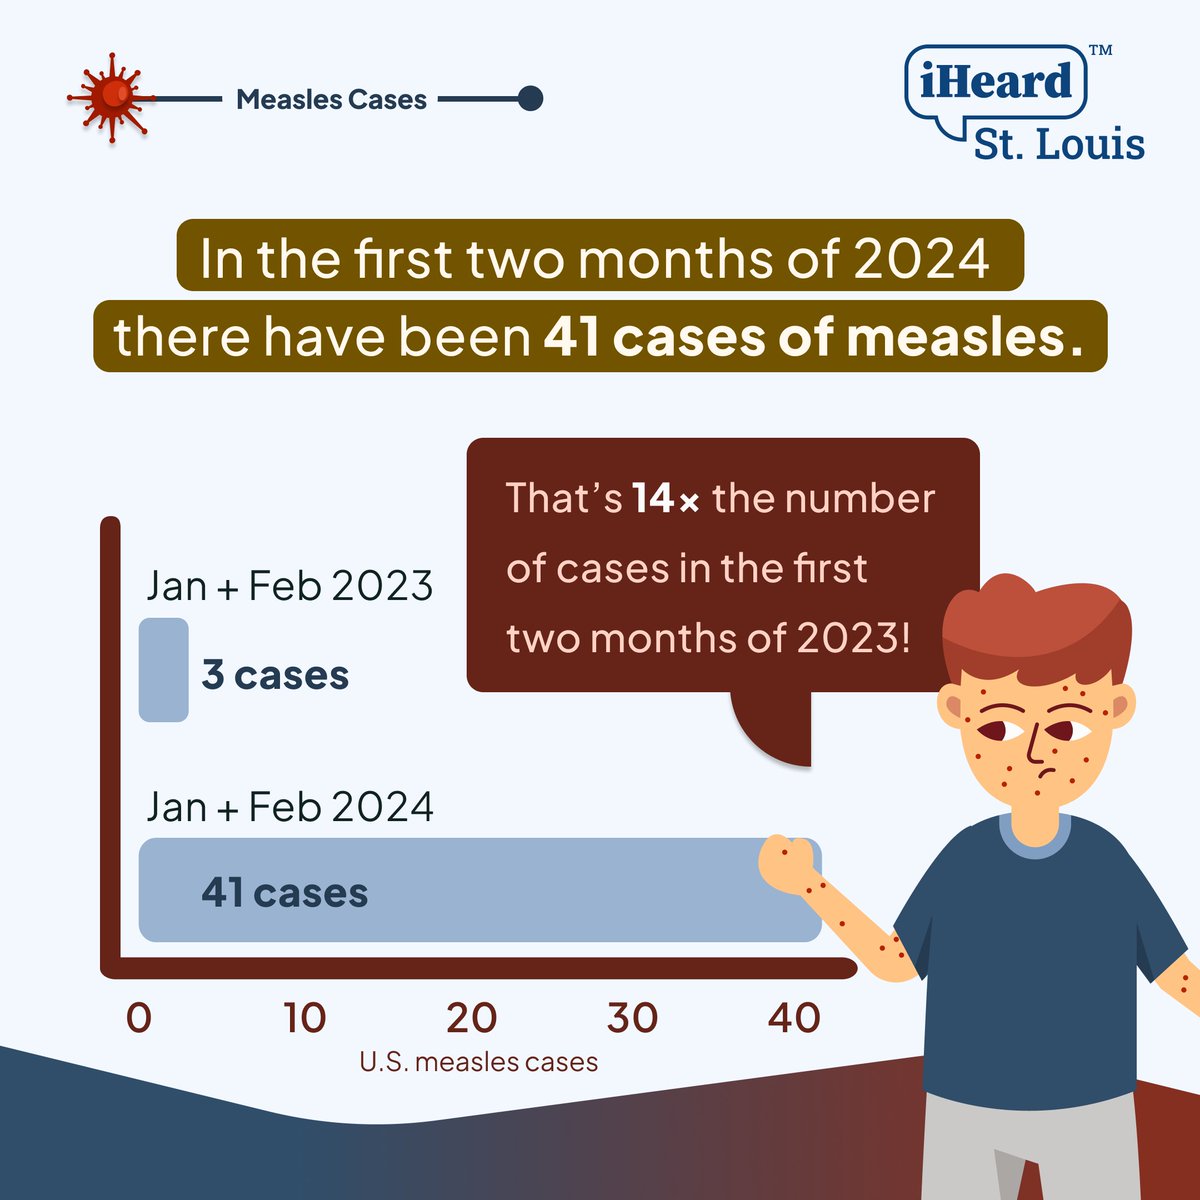 Have you been hearing about the recent measles outbreaks? As of February 29, 41 measles cases were reported in 16 states, including Missouri. Vaccinations reduce the spread of measles & the severity of symptoms. #iHeardSTL #Measles #StayHealthy #GetVaccinated